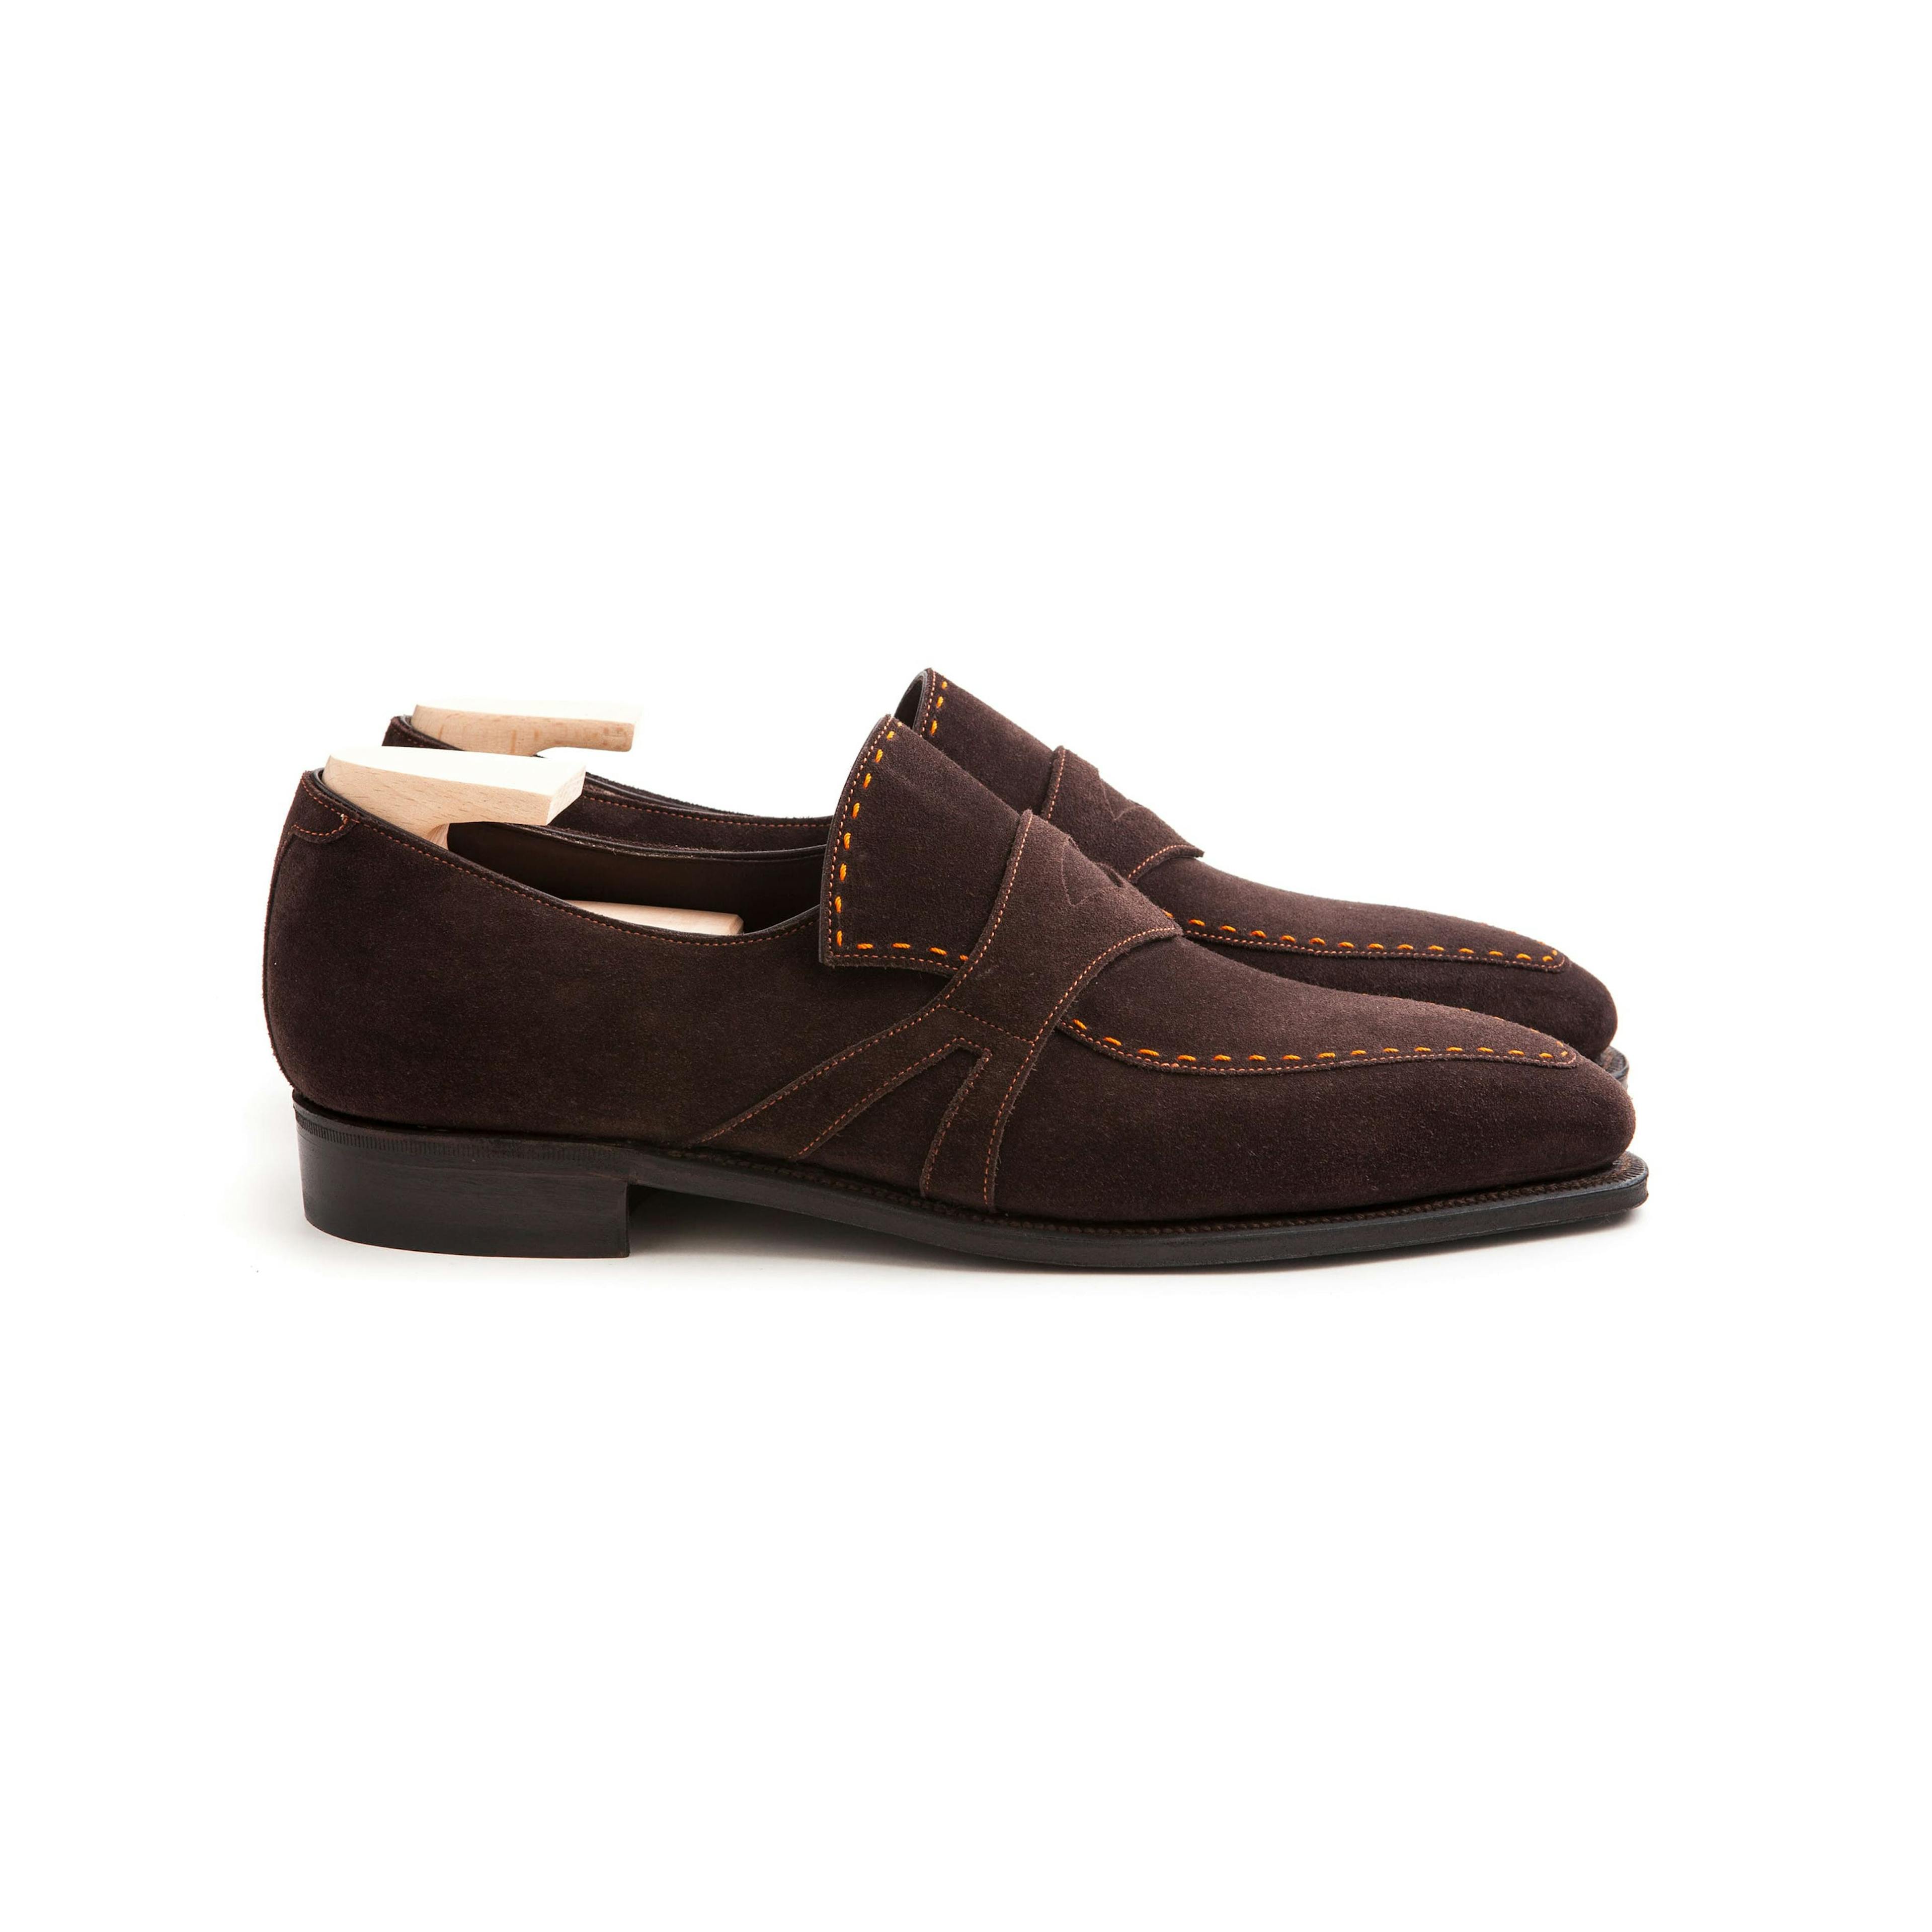 Side view of a Corthay Rascaille in dark brown suede.